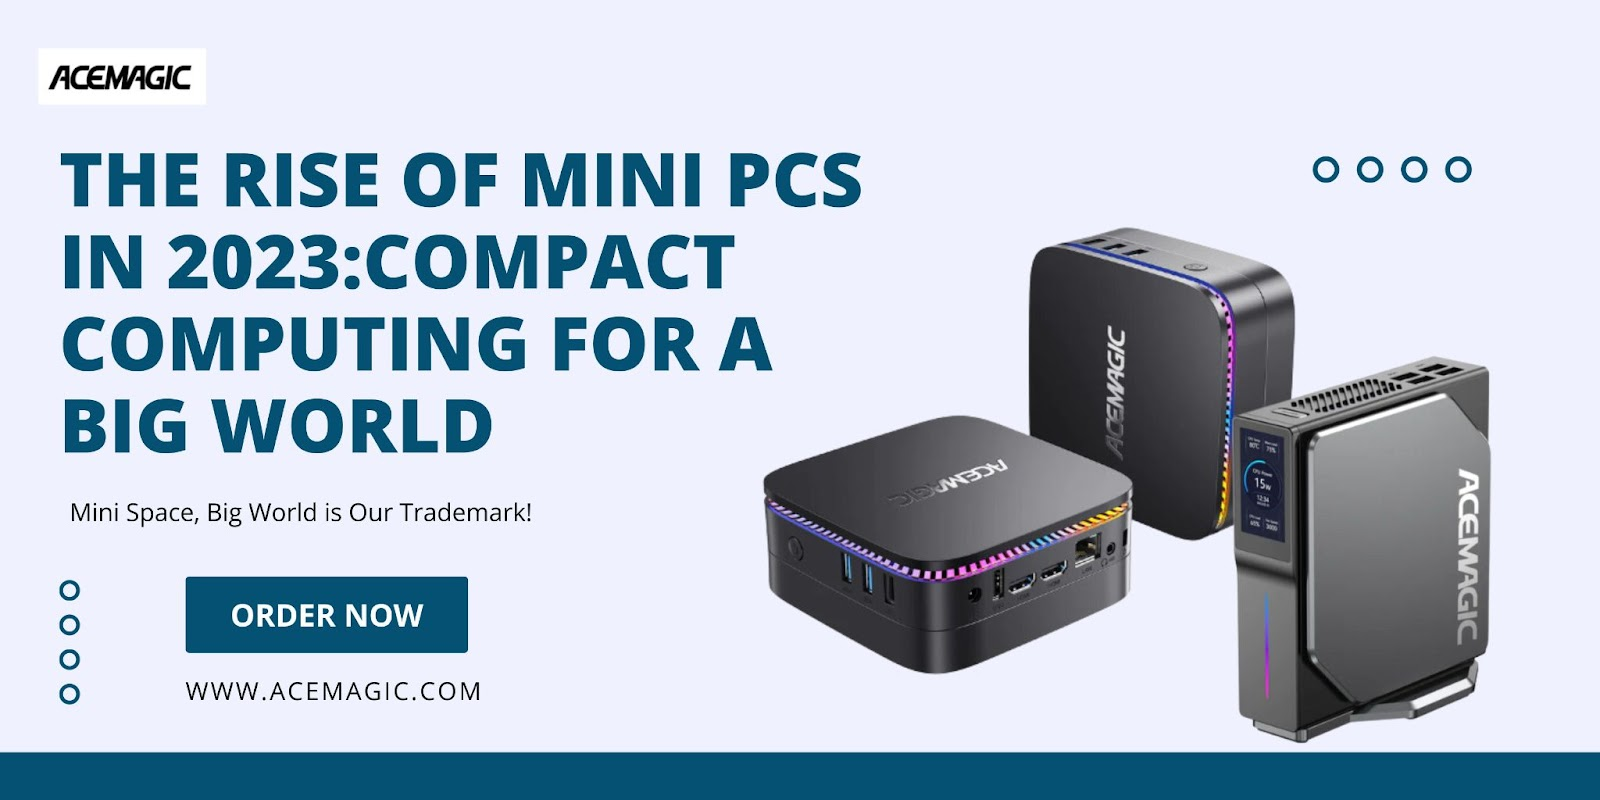 The Rise of Mini PCs in 2023: Compact Computing for a Big World